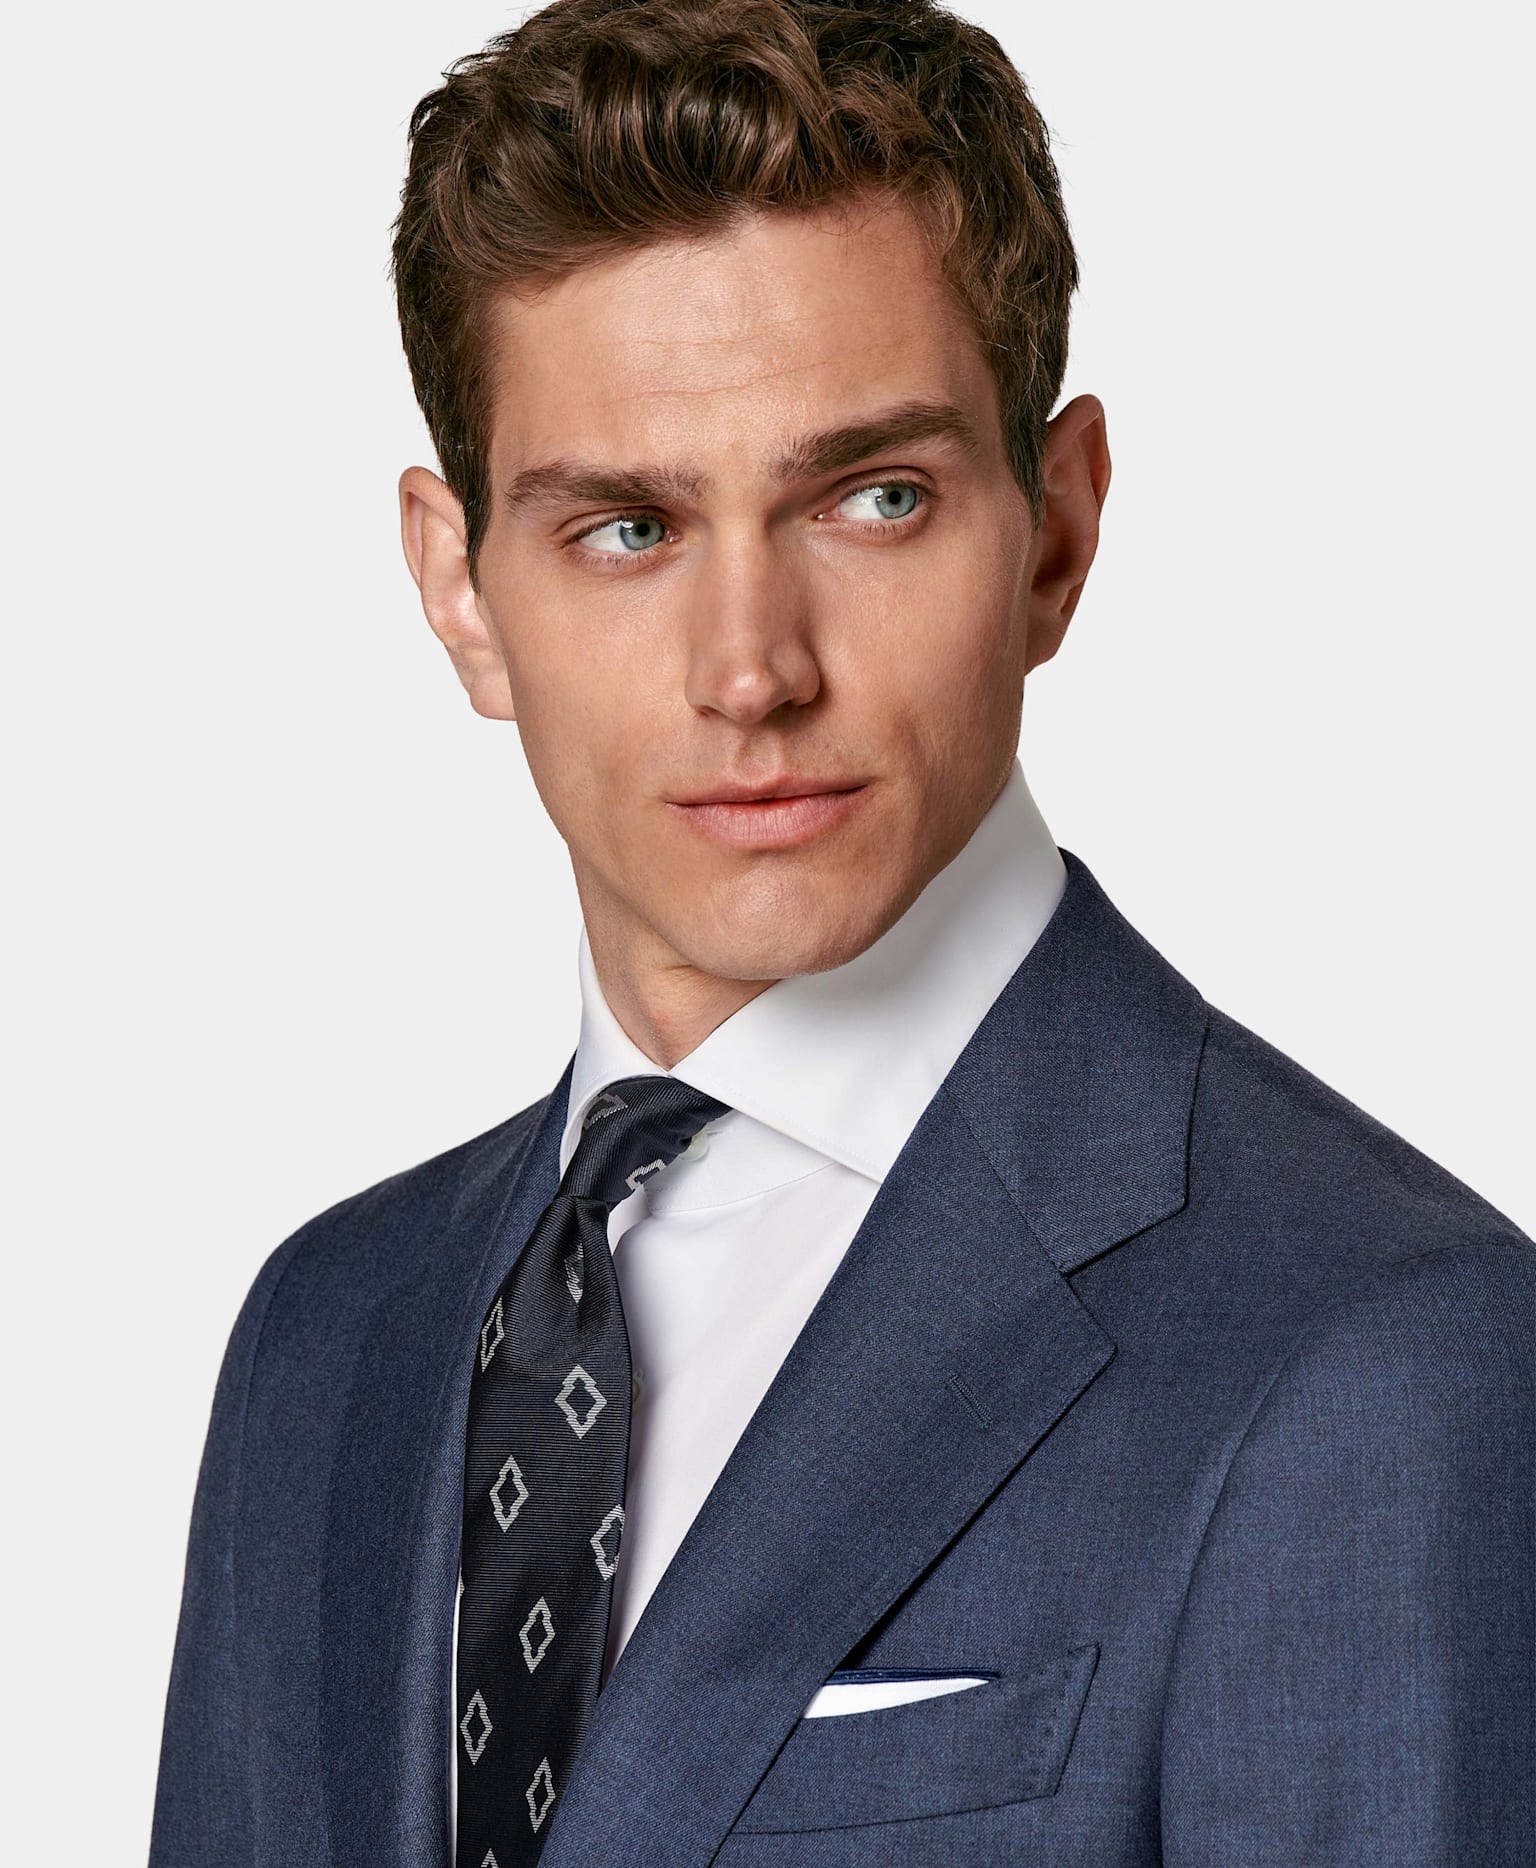 Wedding Attire for Men Explained | SUITSUPPLY US